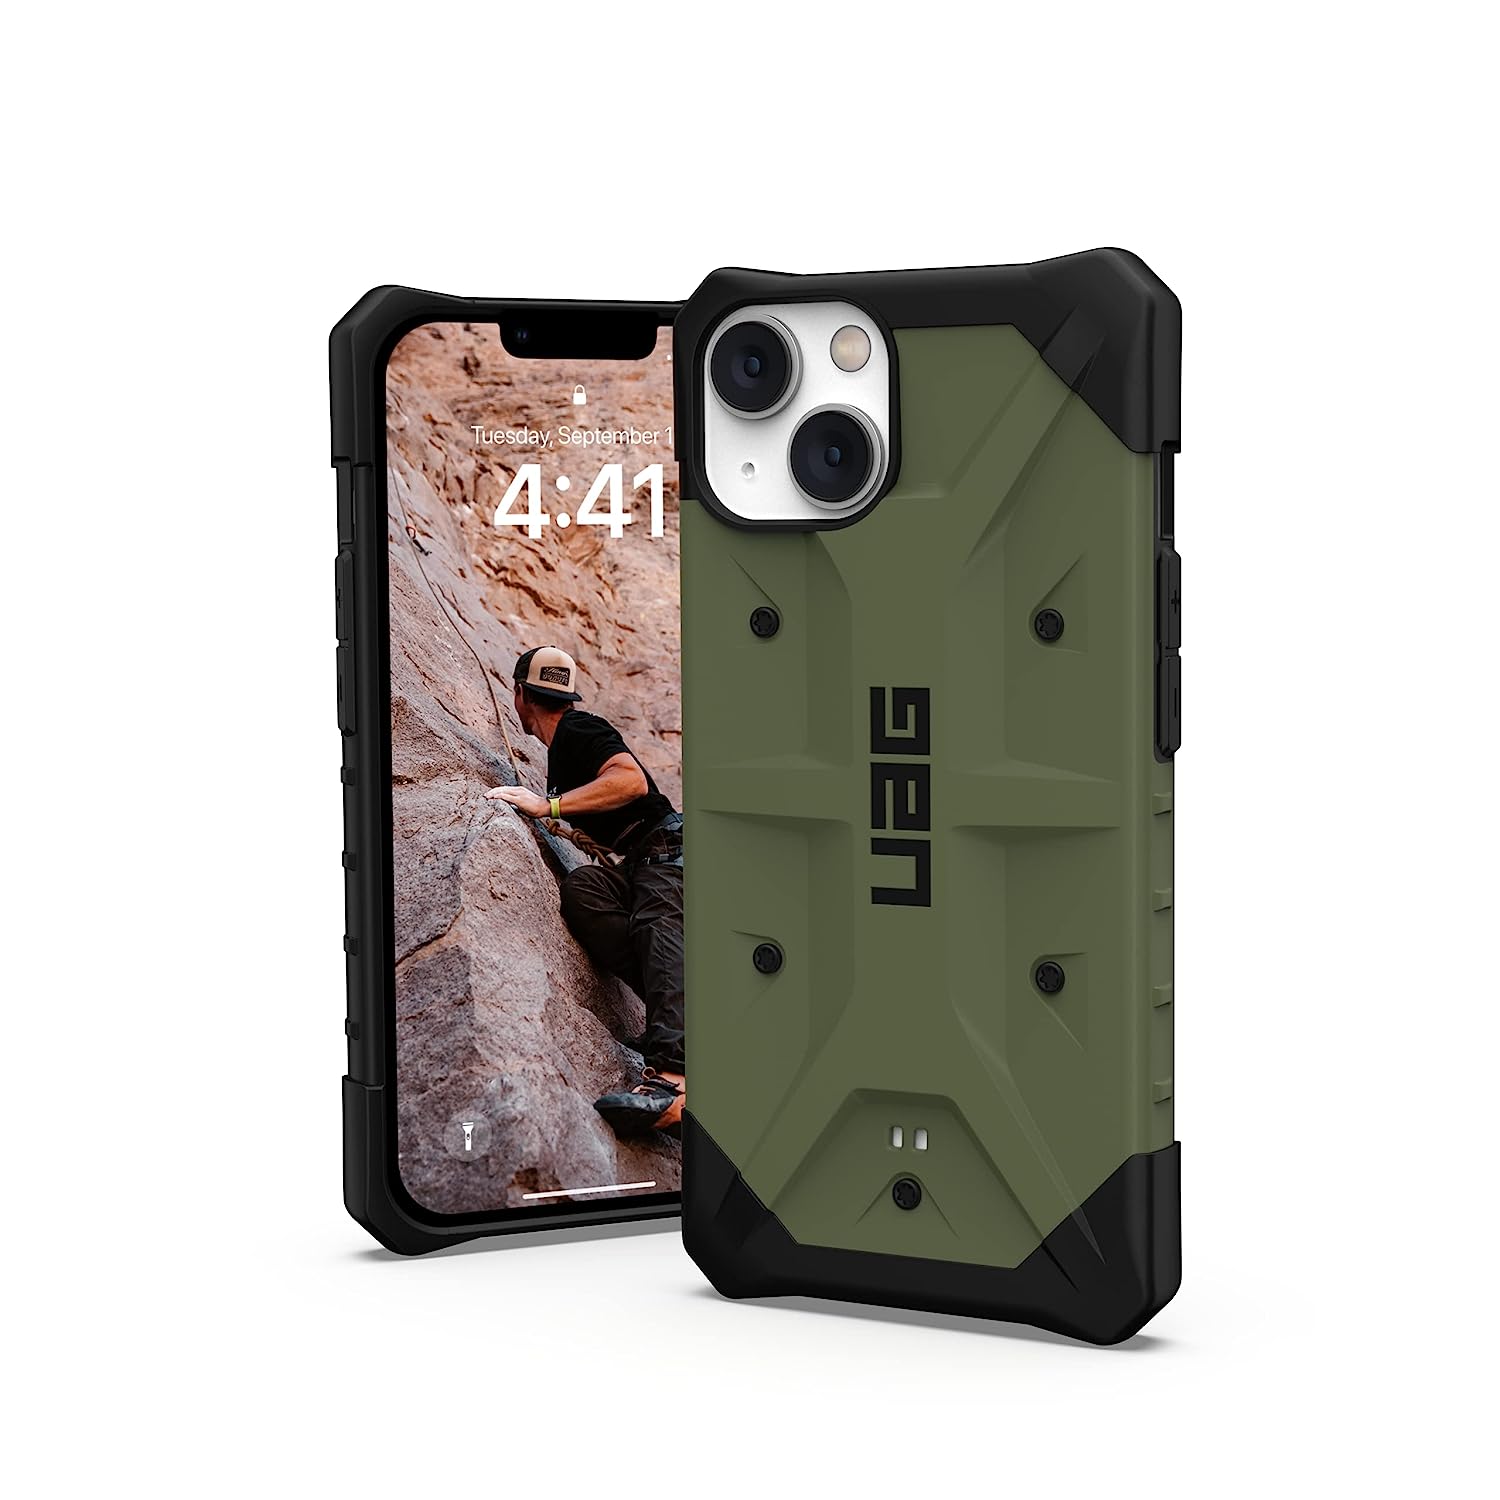 iPhone 14 Pro Armor Cover | Original Urban Armor Slim Fit Rugged Protective Case/Cover Designed For Apple iPhone 14 Pro UAG Olive